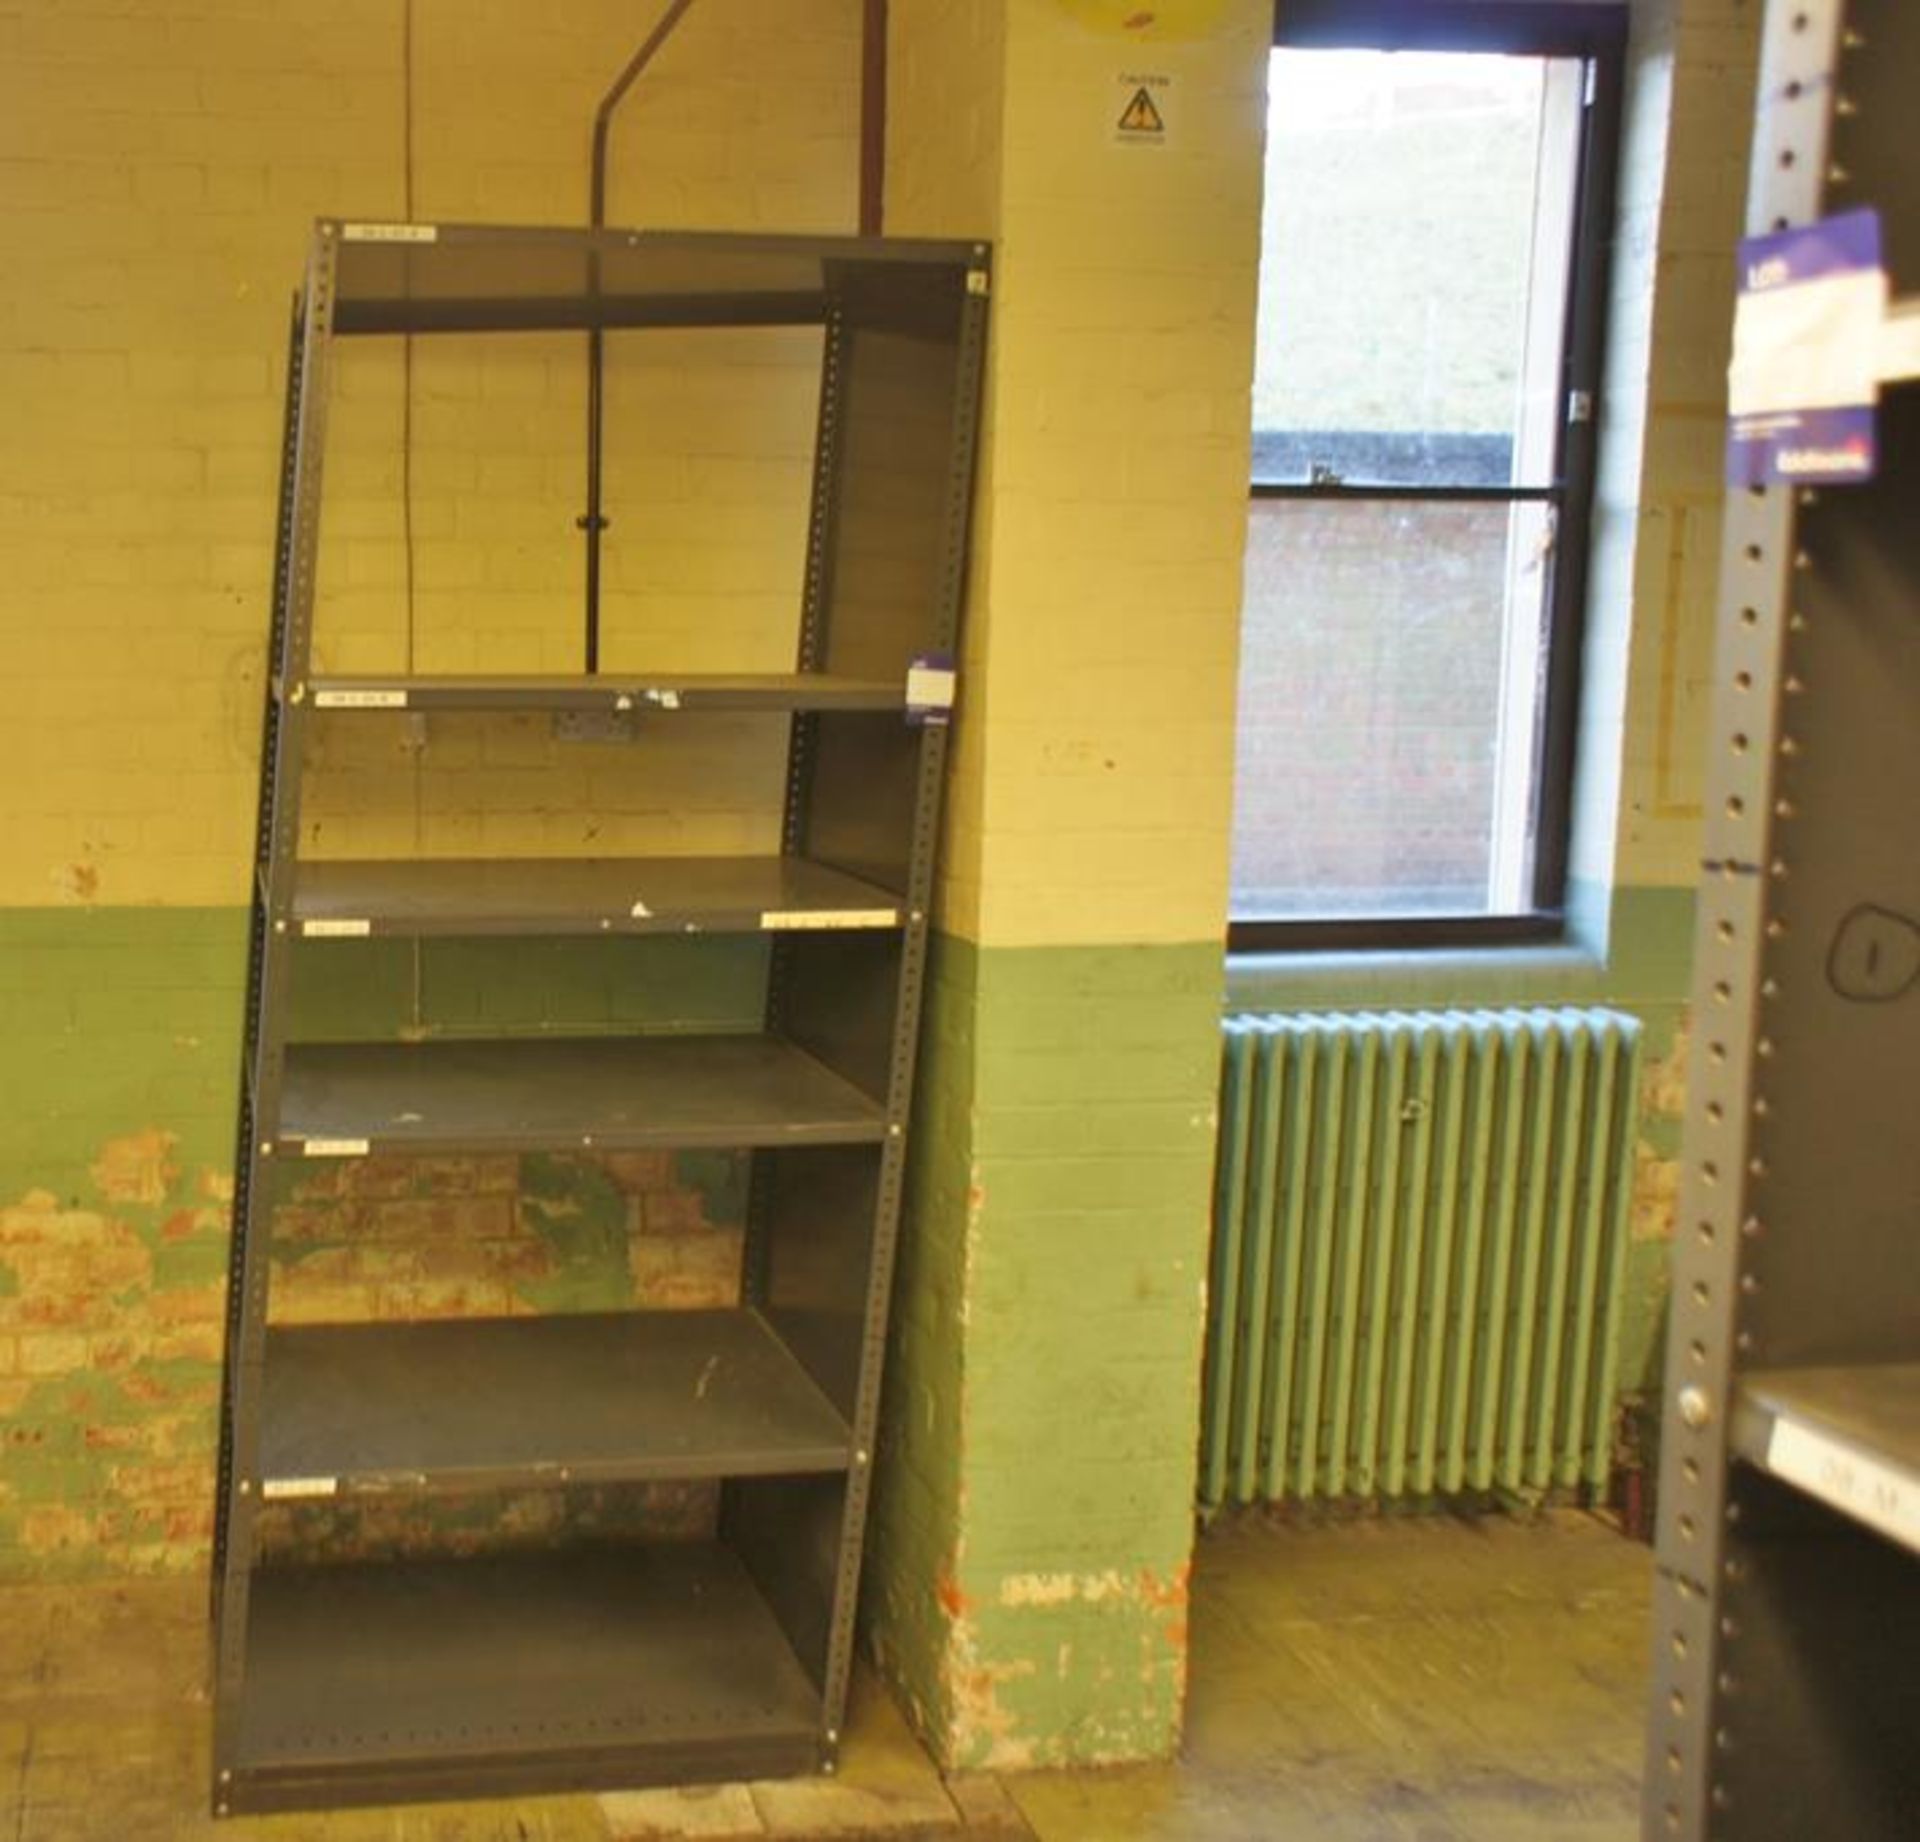 * 33 Bays Link 51 Bolted Shelving Photographs are provided for example purposes only and do not - Image 24 of 24